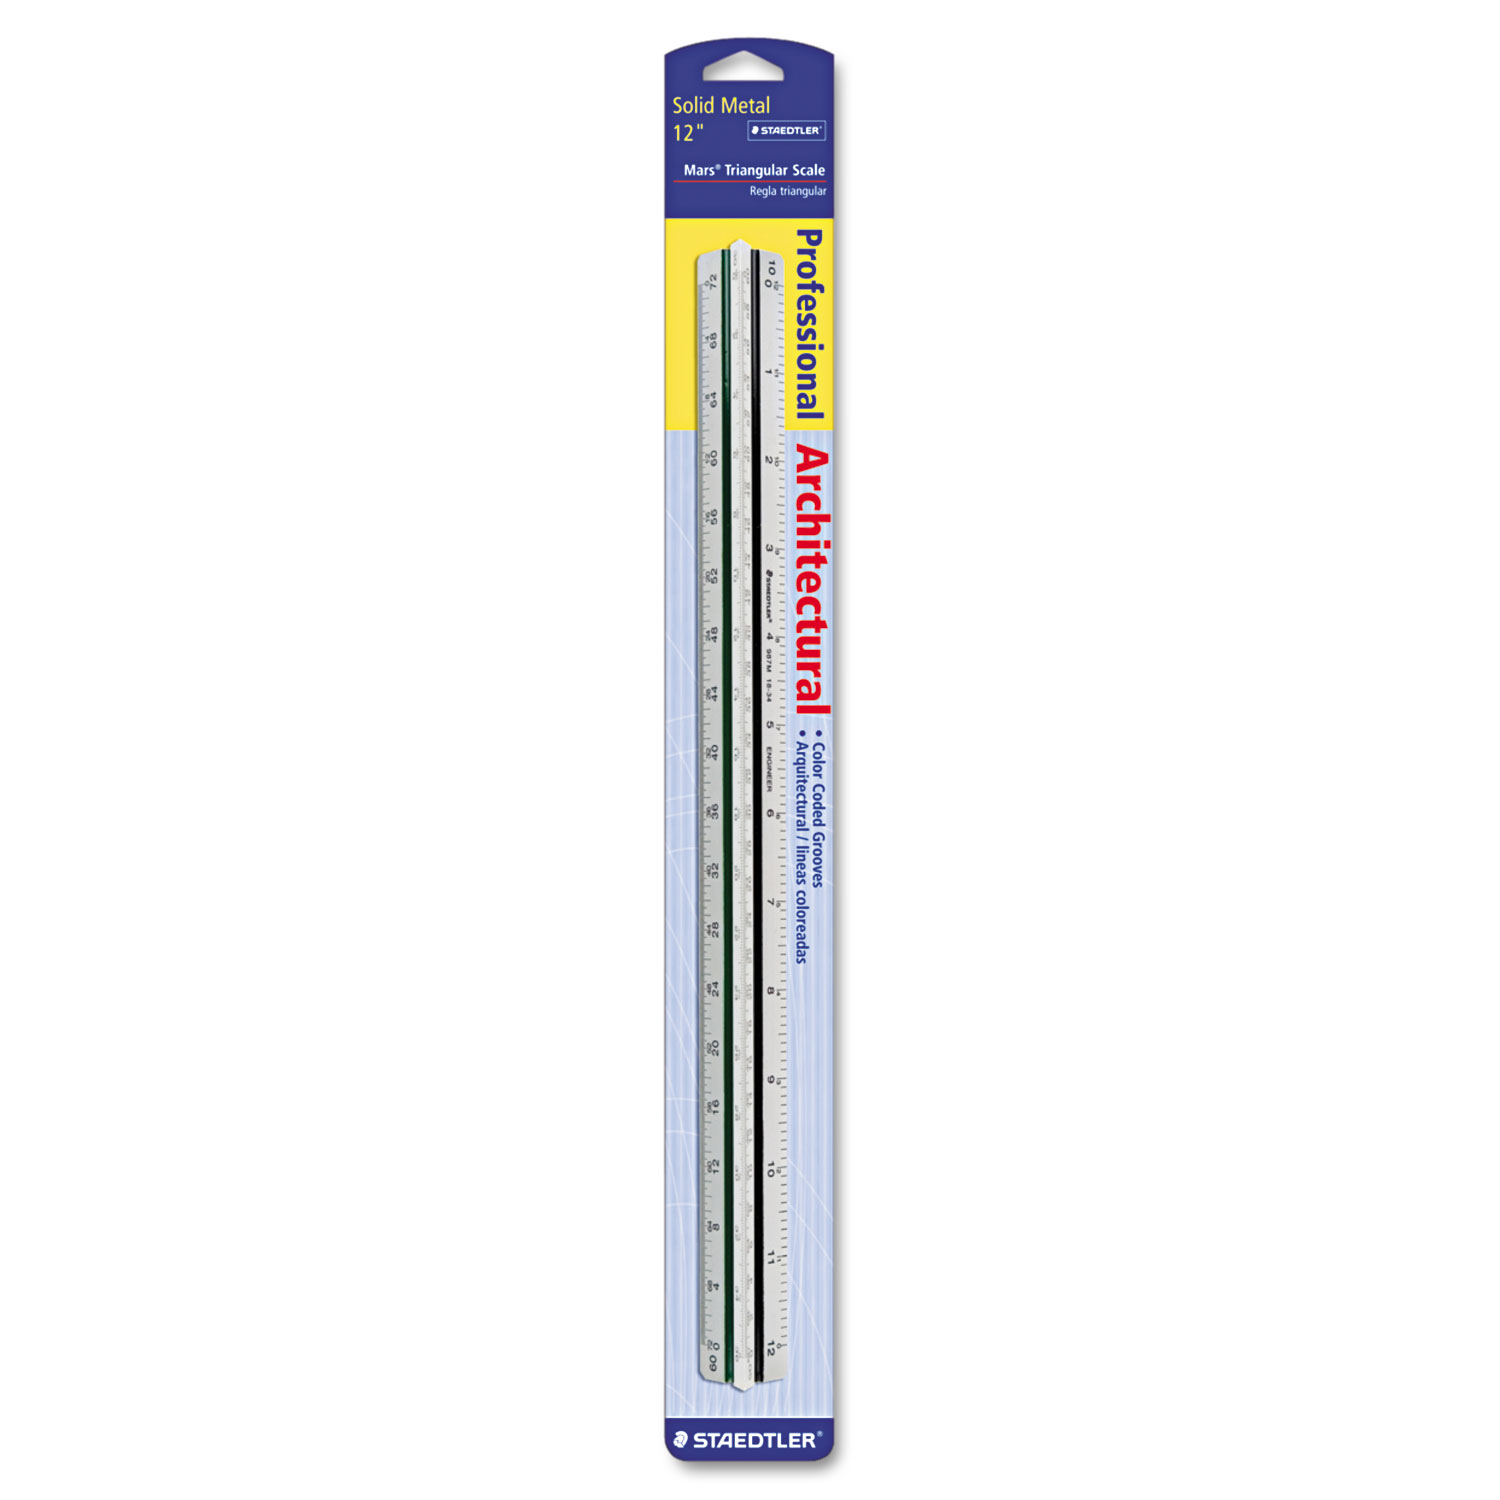  Staedtler 987 18-31BK Triangular Scale for Architects, Color-Coded Grooves, 12 inches (STD9871831BK) 